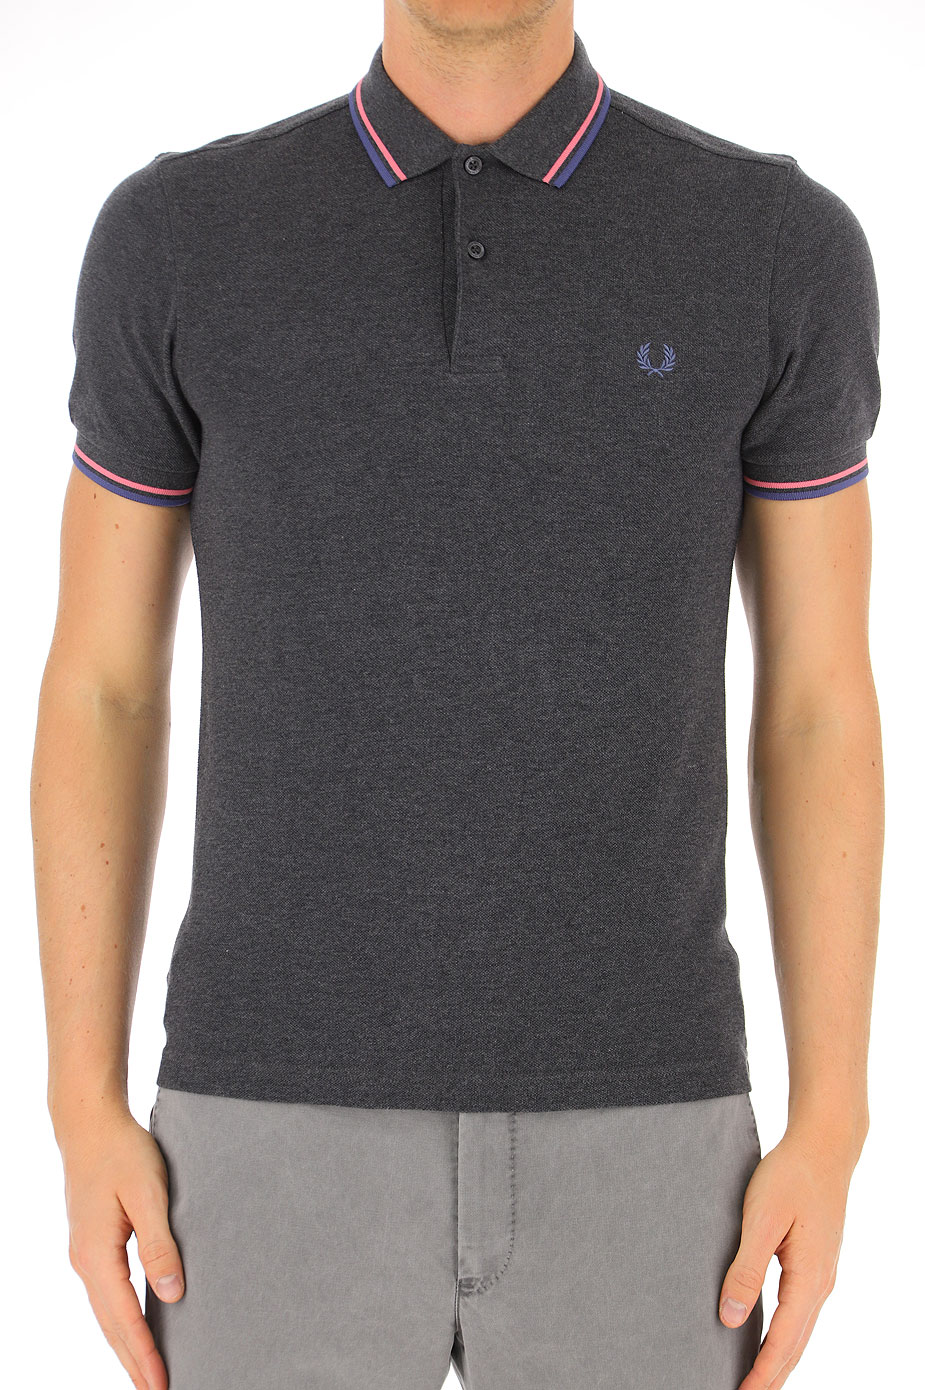 Mens Clothing Fred Perry, Style code: m3600-c86-